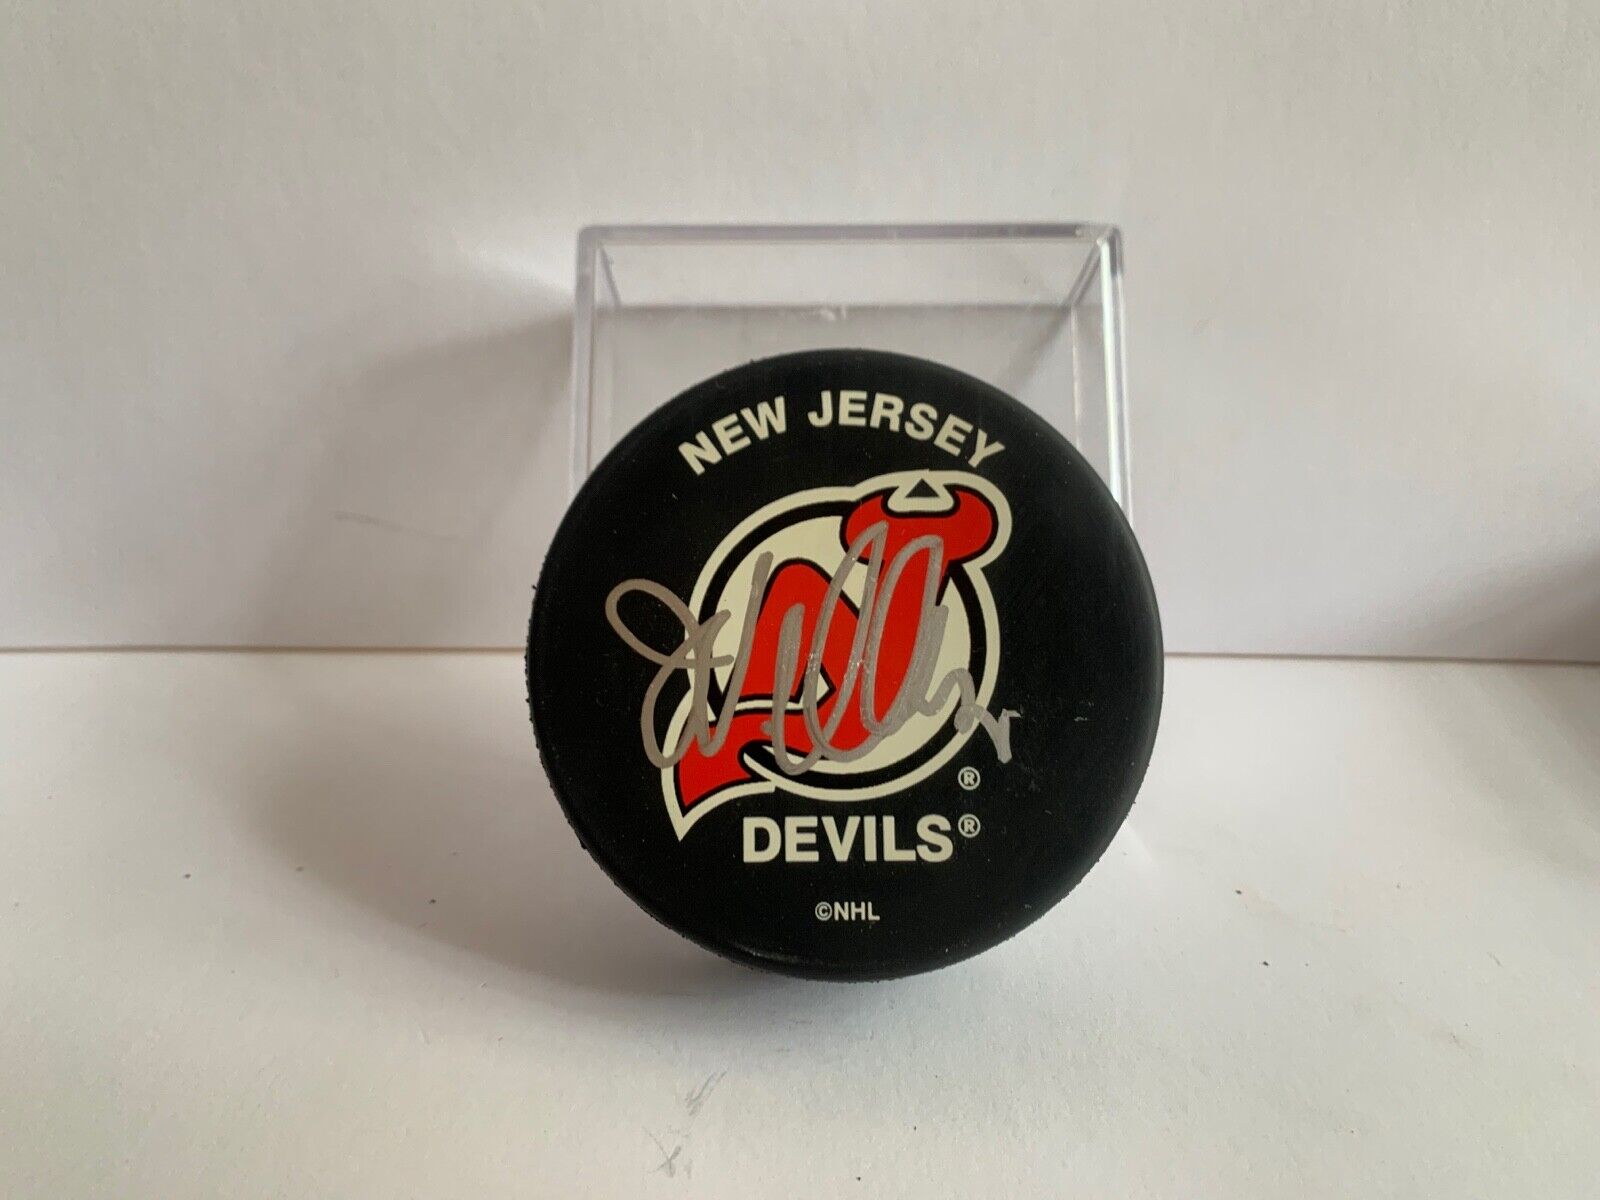 John Vanbresbrouck Autographed Official NHL Hockey Puck with New Jersey Logo